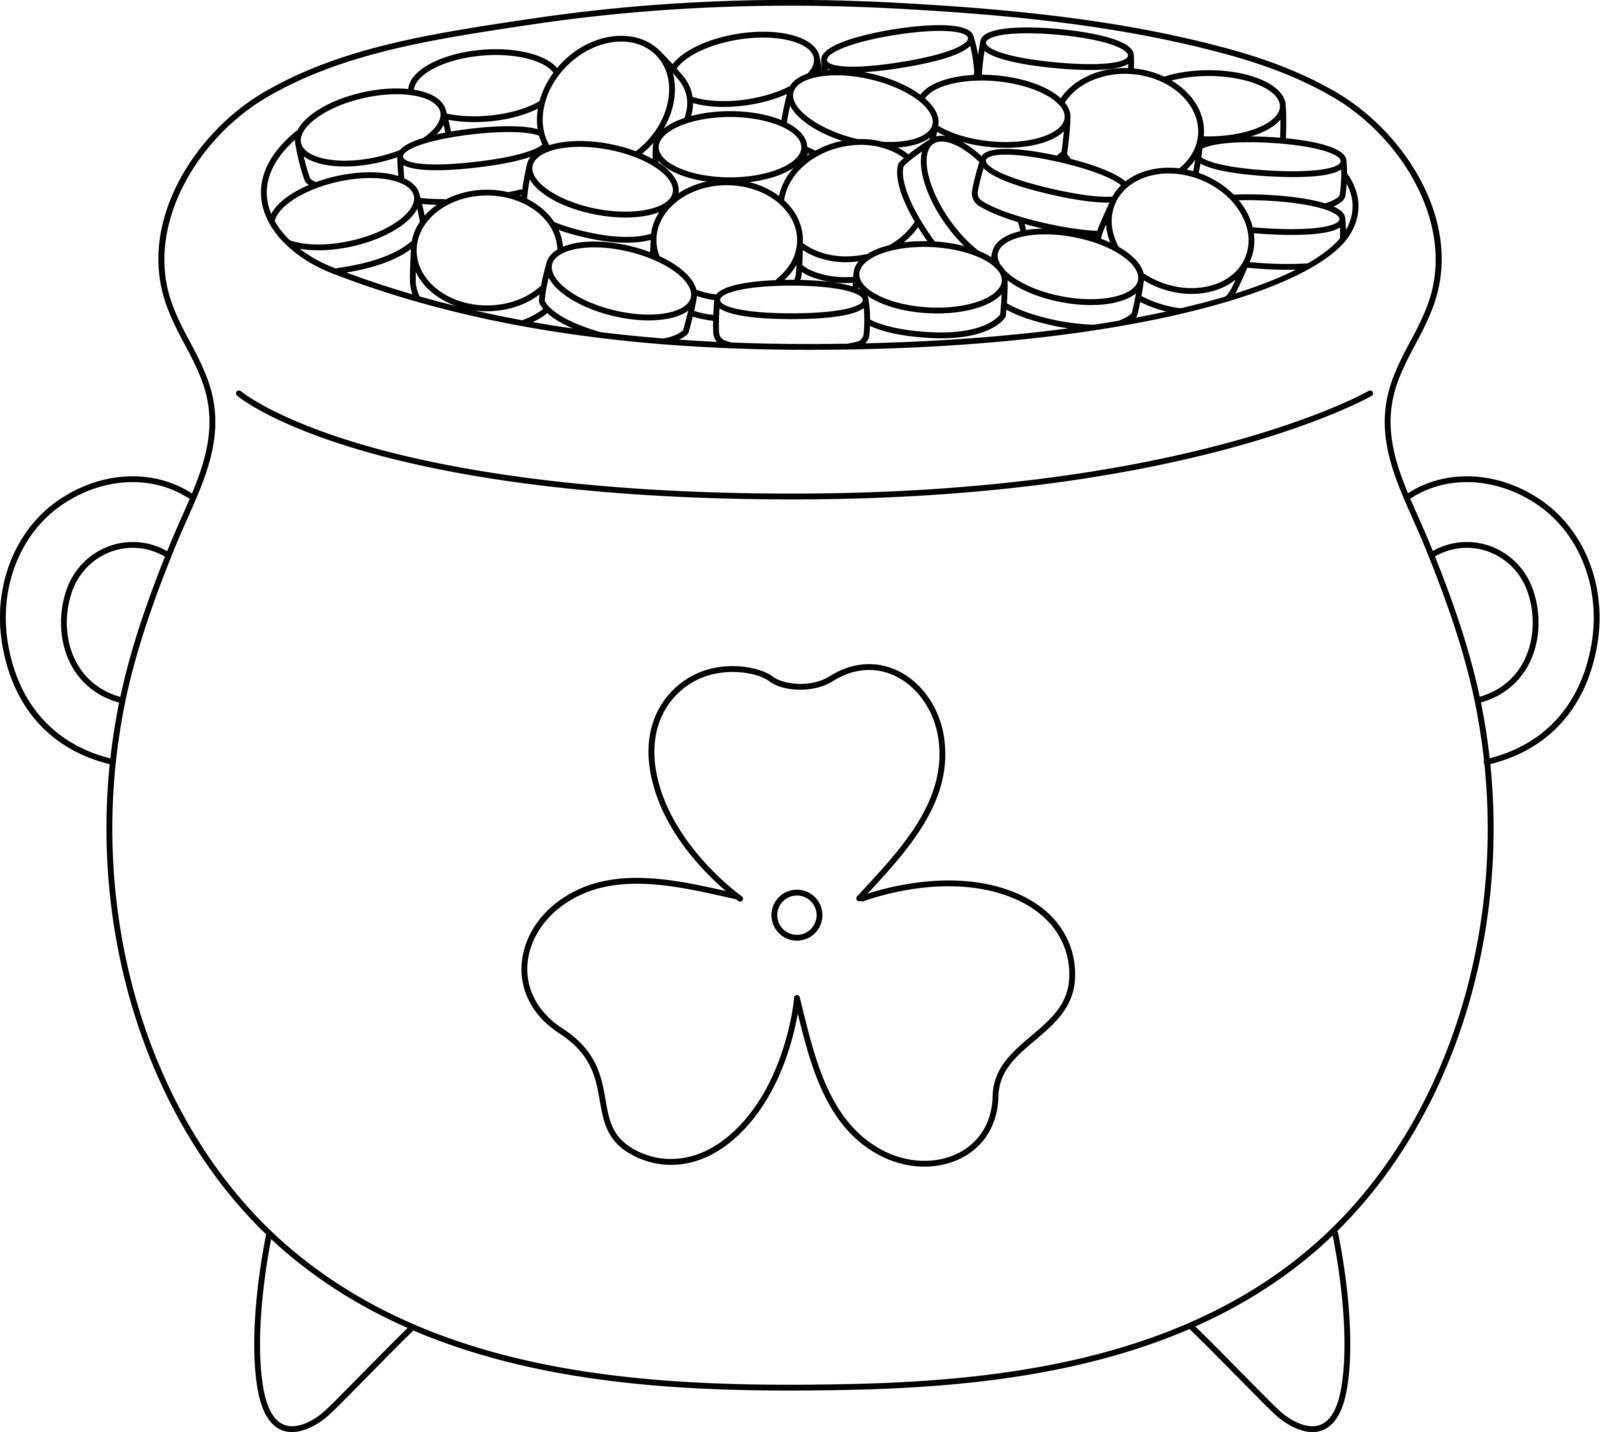 A cute and funny coloring page of a St. Patrick Day pot of gold. Provides hours of coloring fun for children. To color, this page is very easy. Suitable for little kids and toddlers.